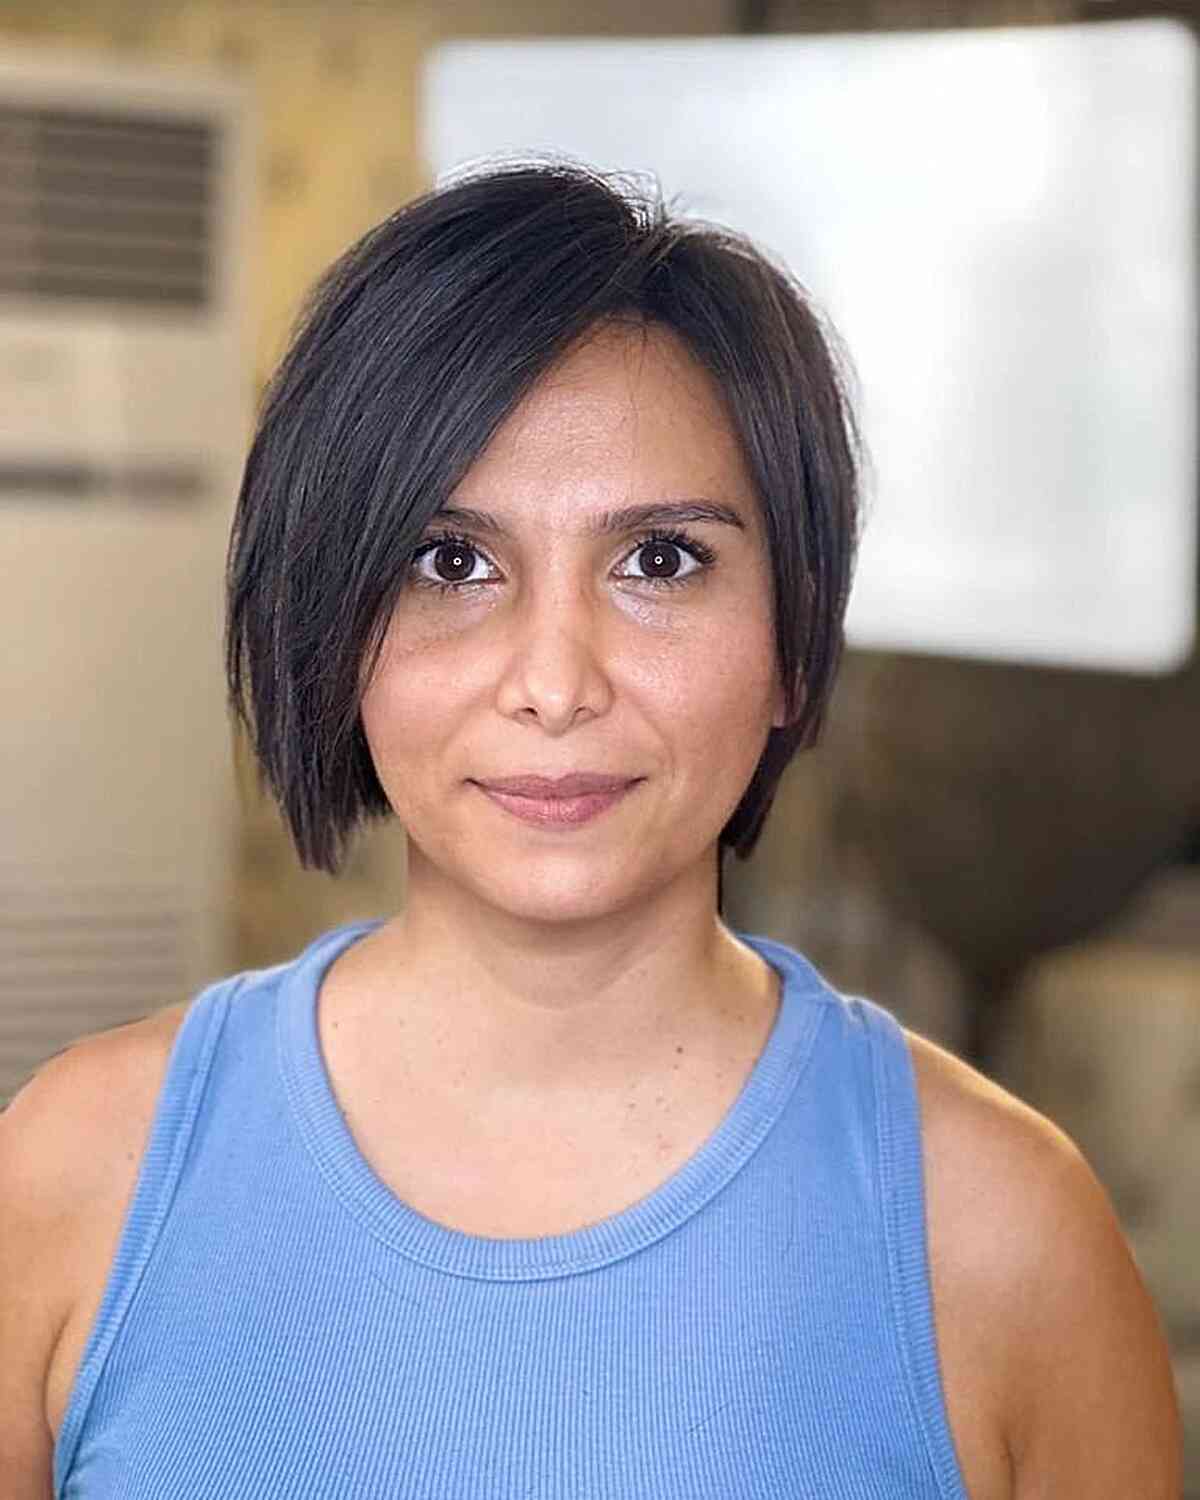 Chin-Length Bob with an Off Center Part and Layers